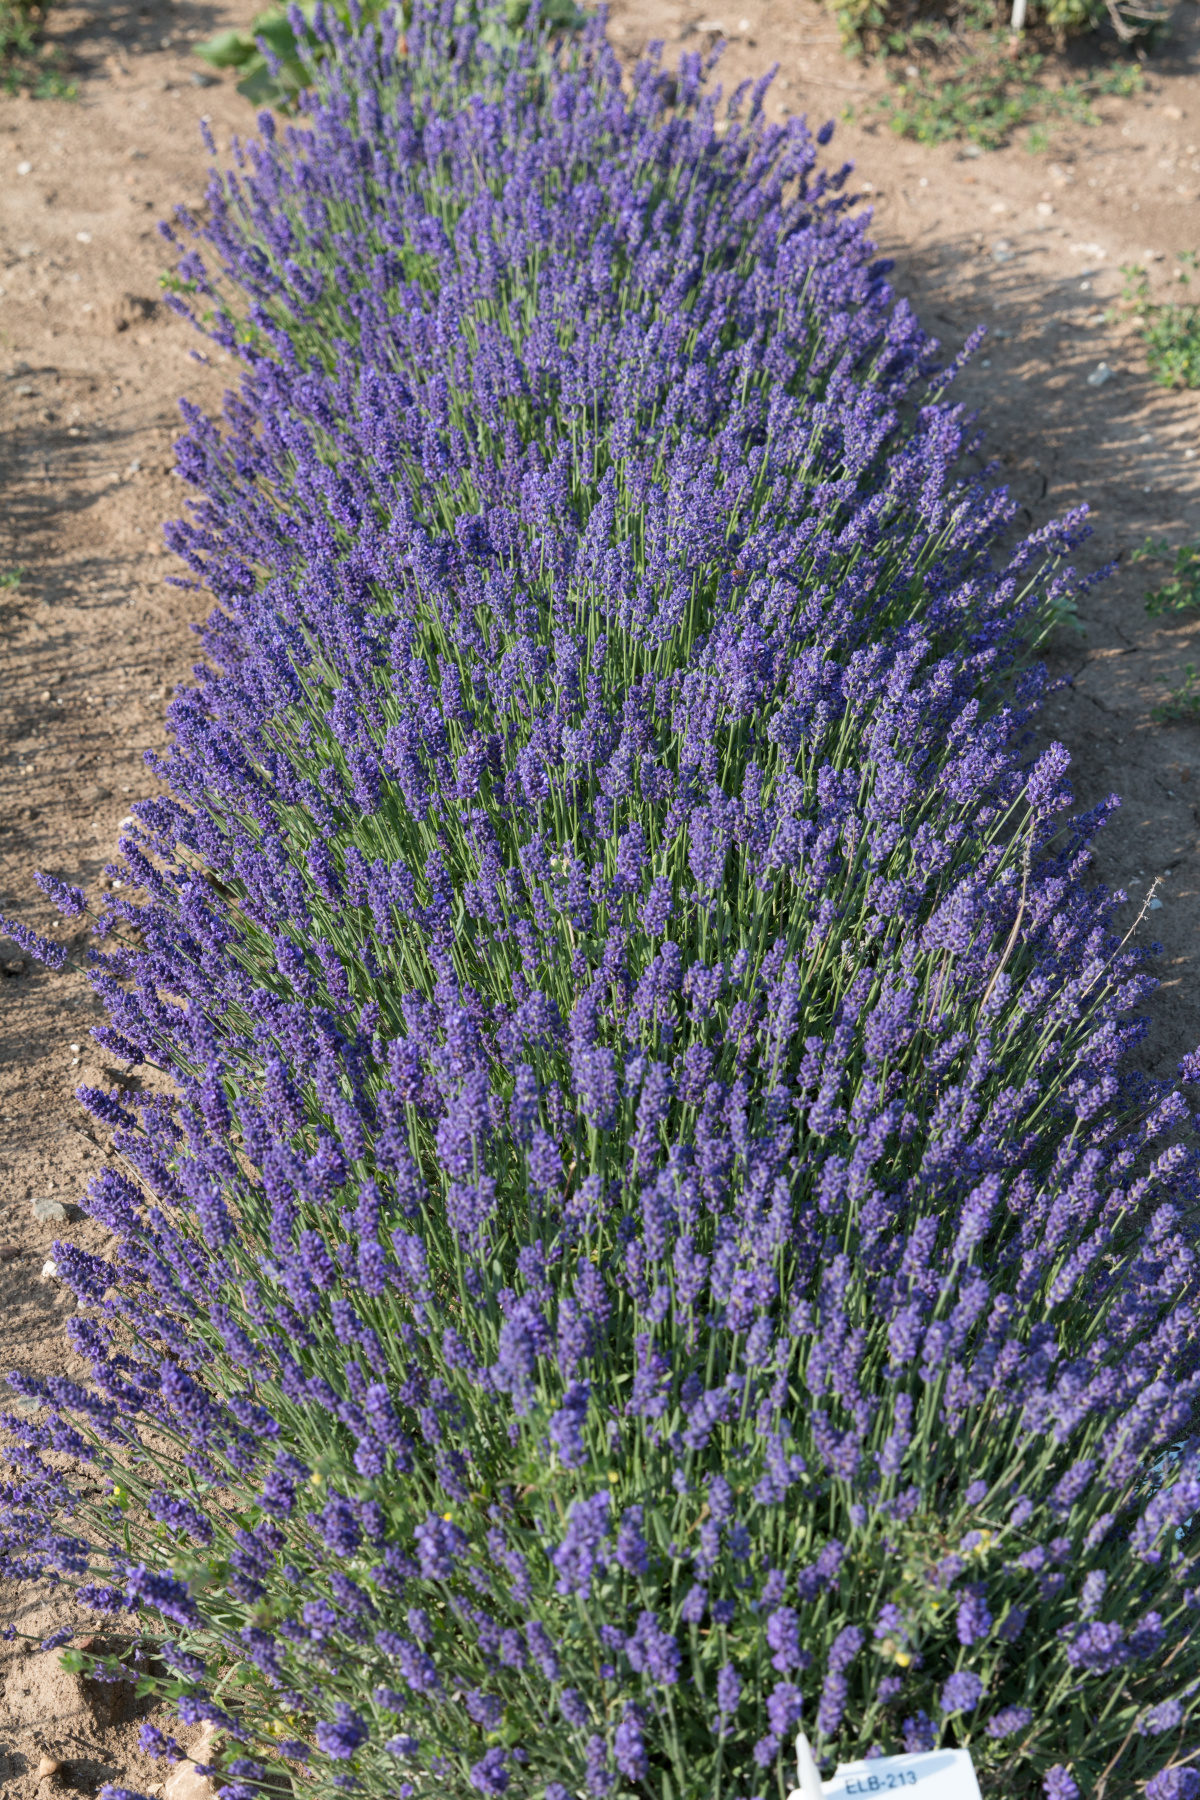 Lavender Super Blue will probably bloom out here in June. It’s fairly uniform at 12 inches tall, making it good as an edger or in pots. It’s touted as being very hardy, drought tolerant as well as heat and humidity tolerant. Sounds like a winter for the Hamptons.